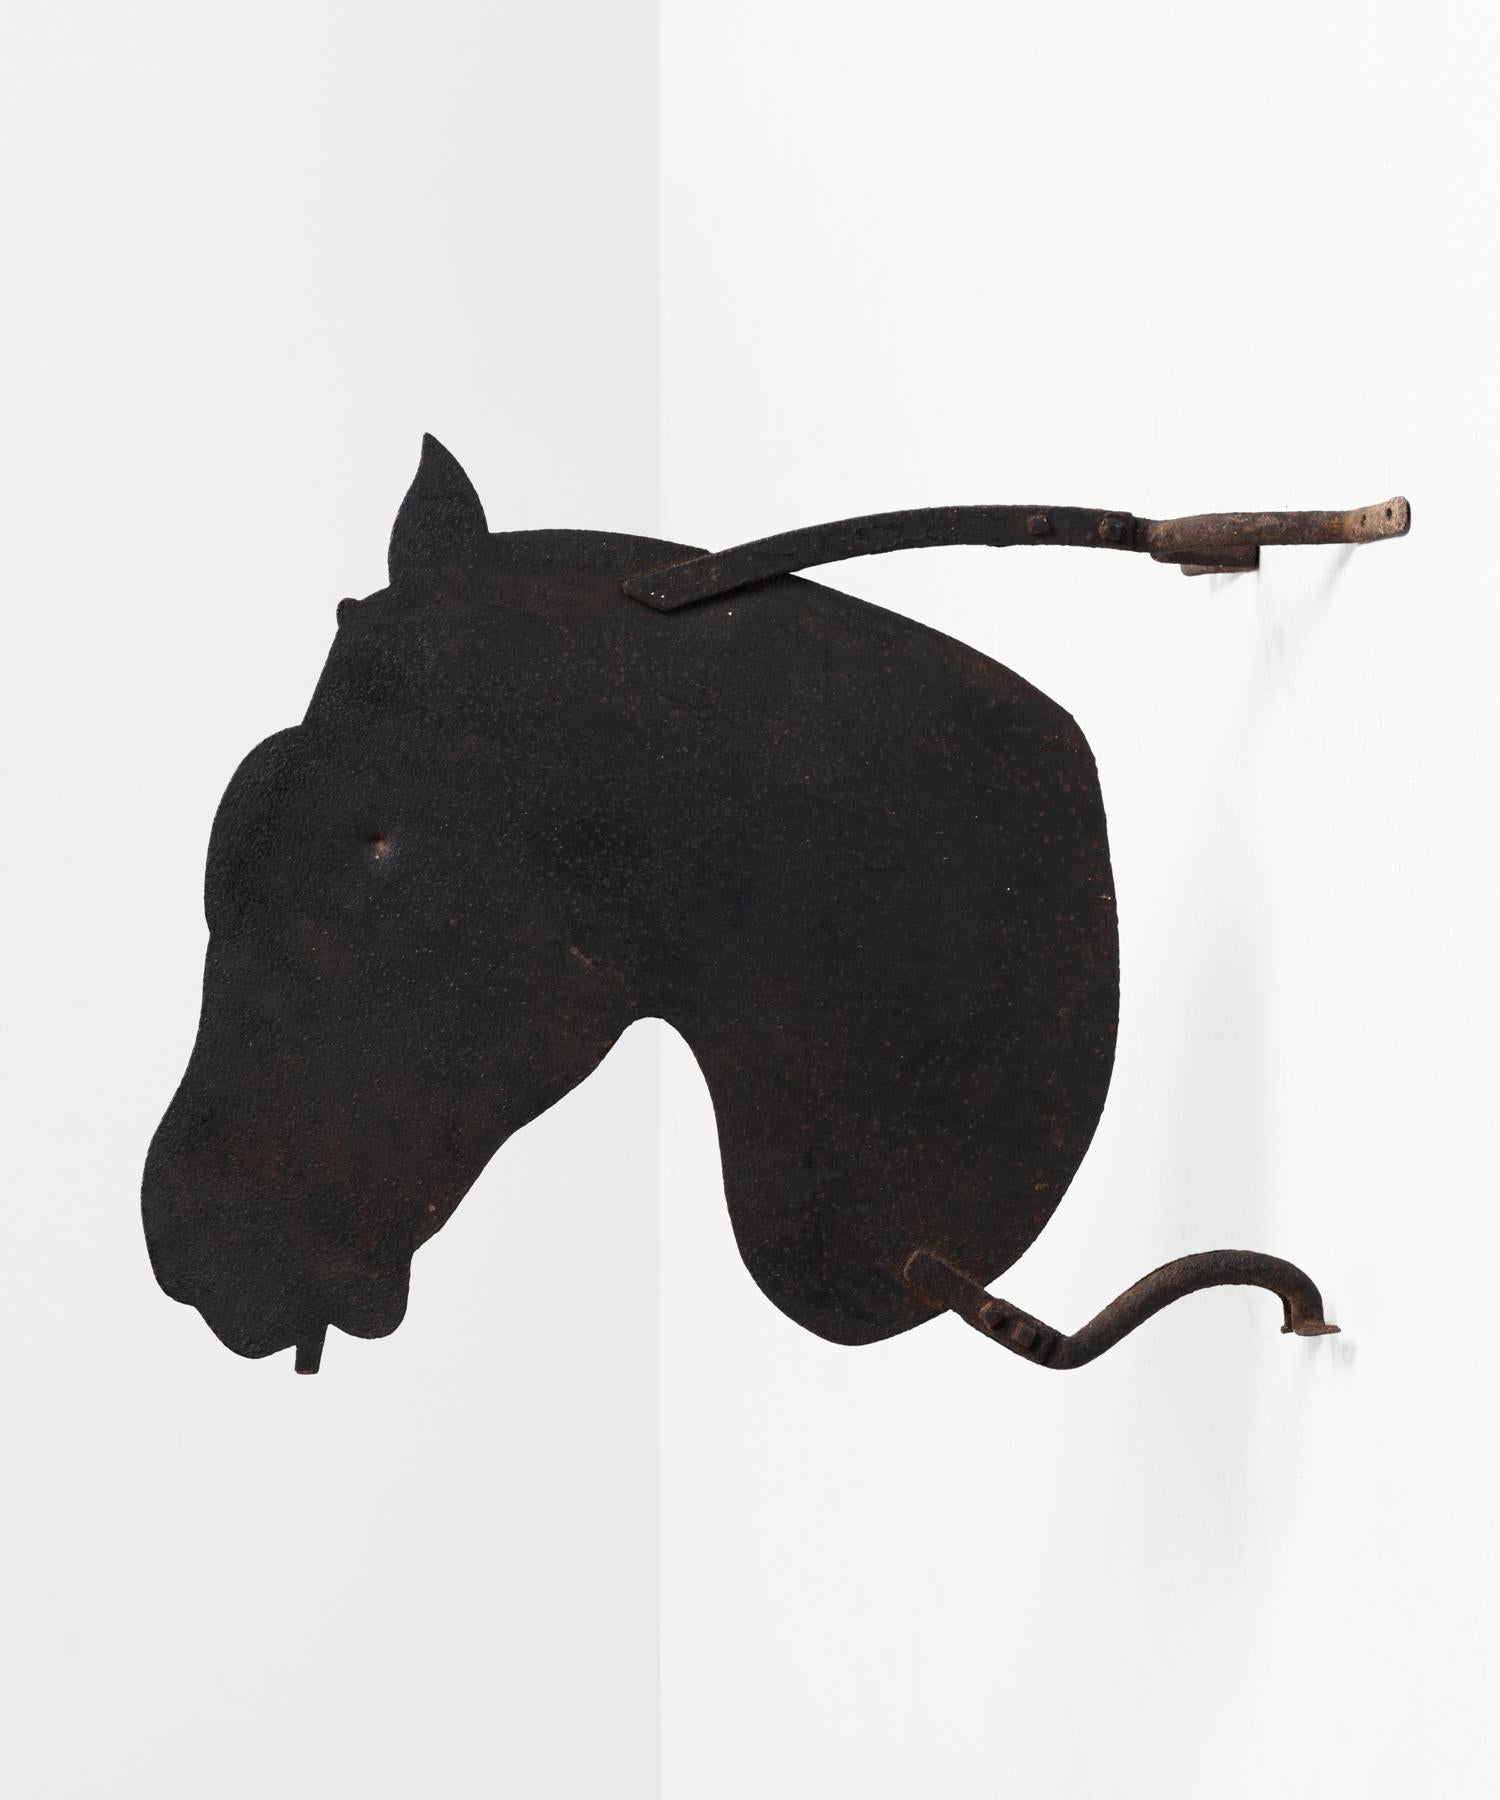 Iron saddlers horse sign, circa 1890.

Wall mounted sign made from flat iron with original mounting brackets.